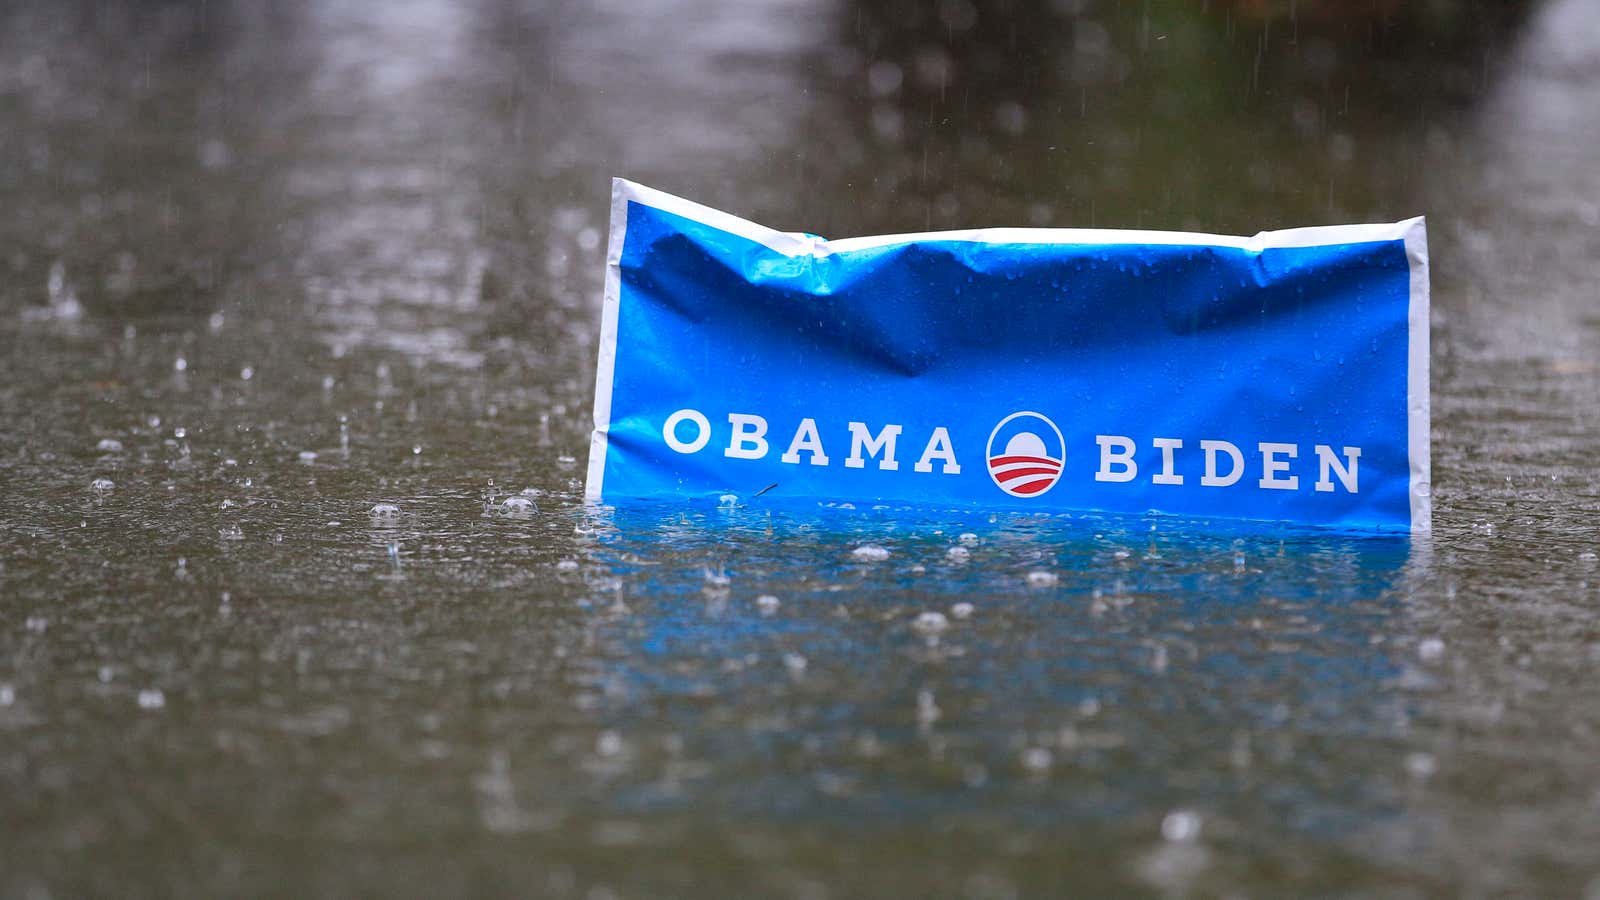 Does bad weather mean Obama’s reelection chances are all wet?